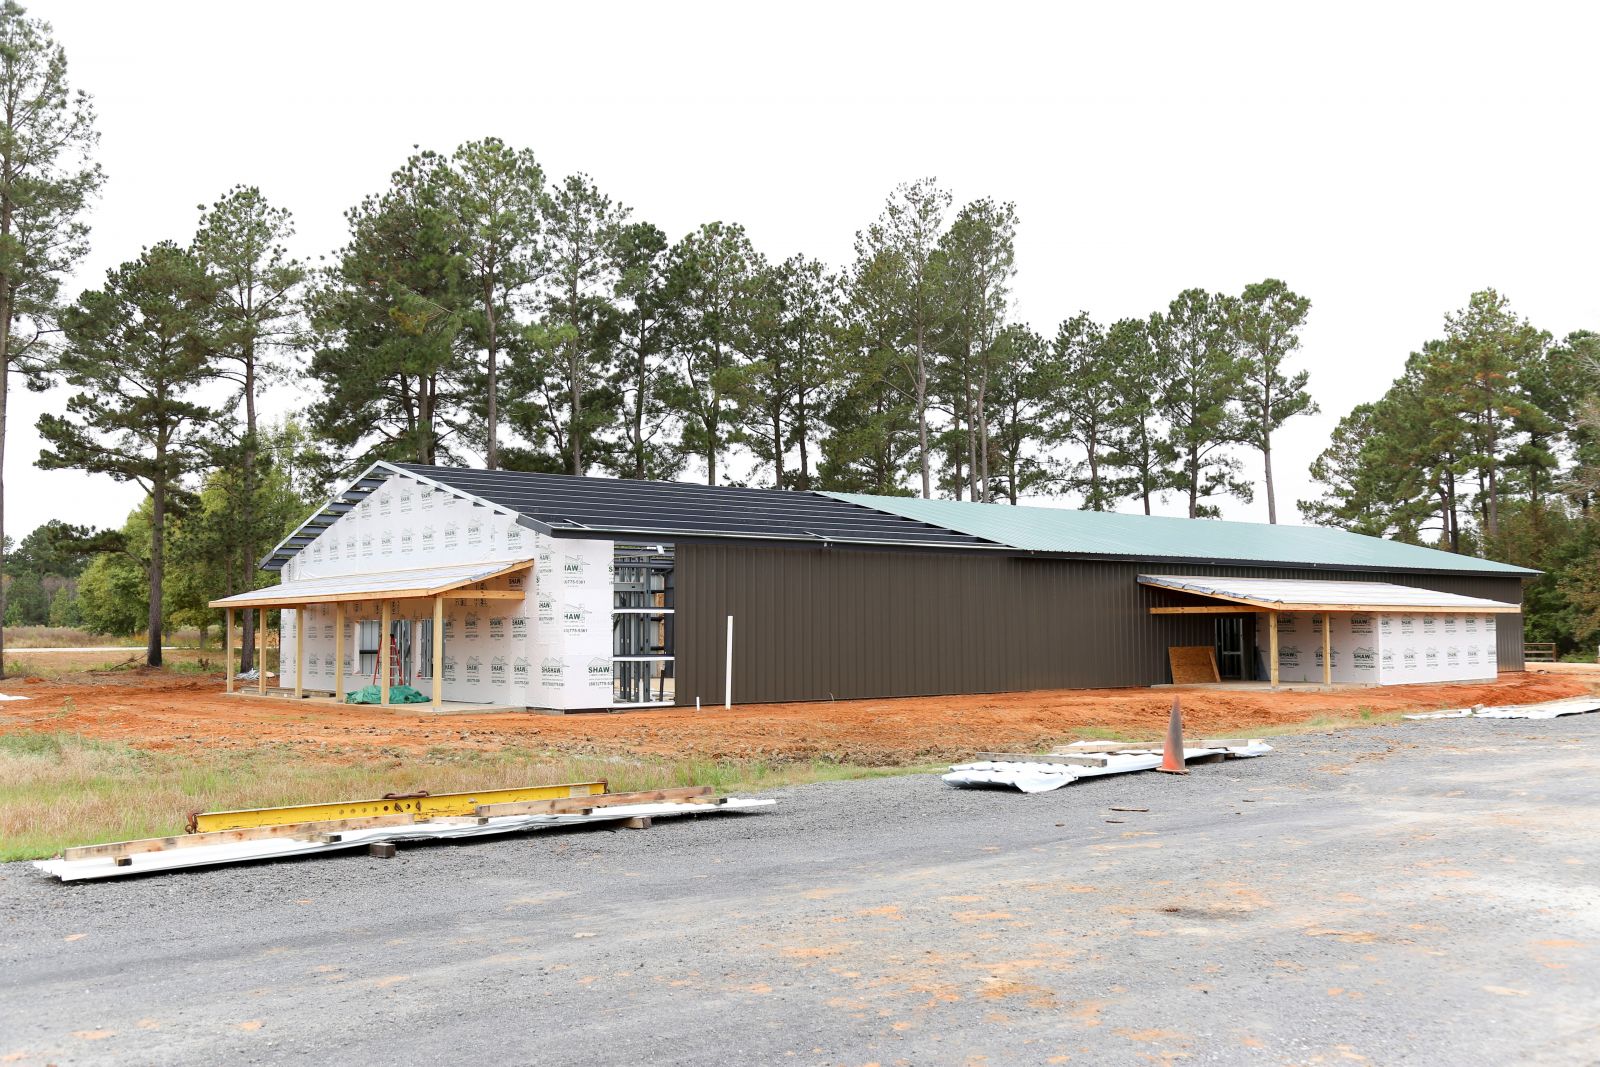 The Darnall W. and Susan F. Boyd Foundation has gifted a new, 300-seat dining hall to the South Carolina Waterfowl Association. (Photo/Provided)